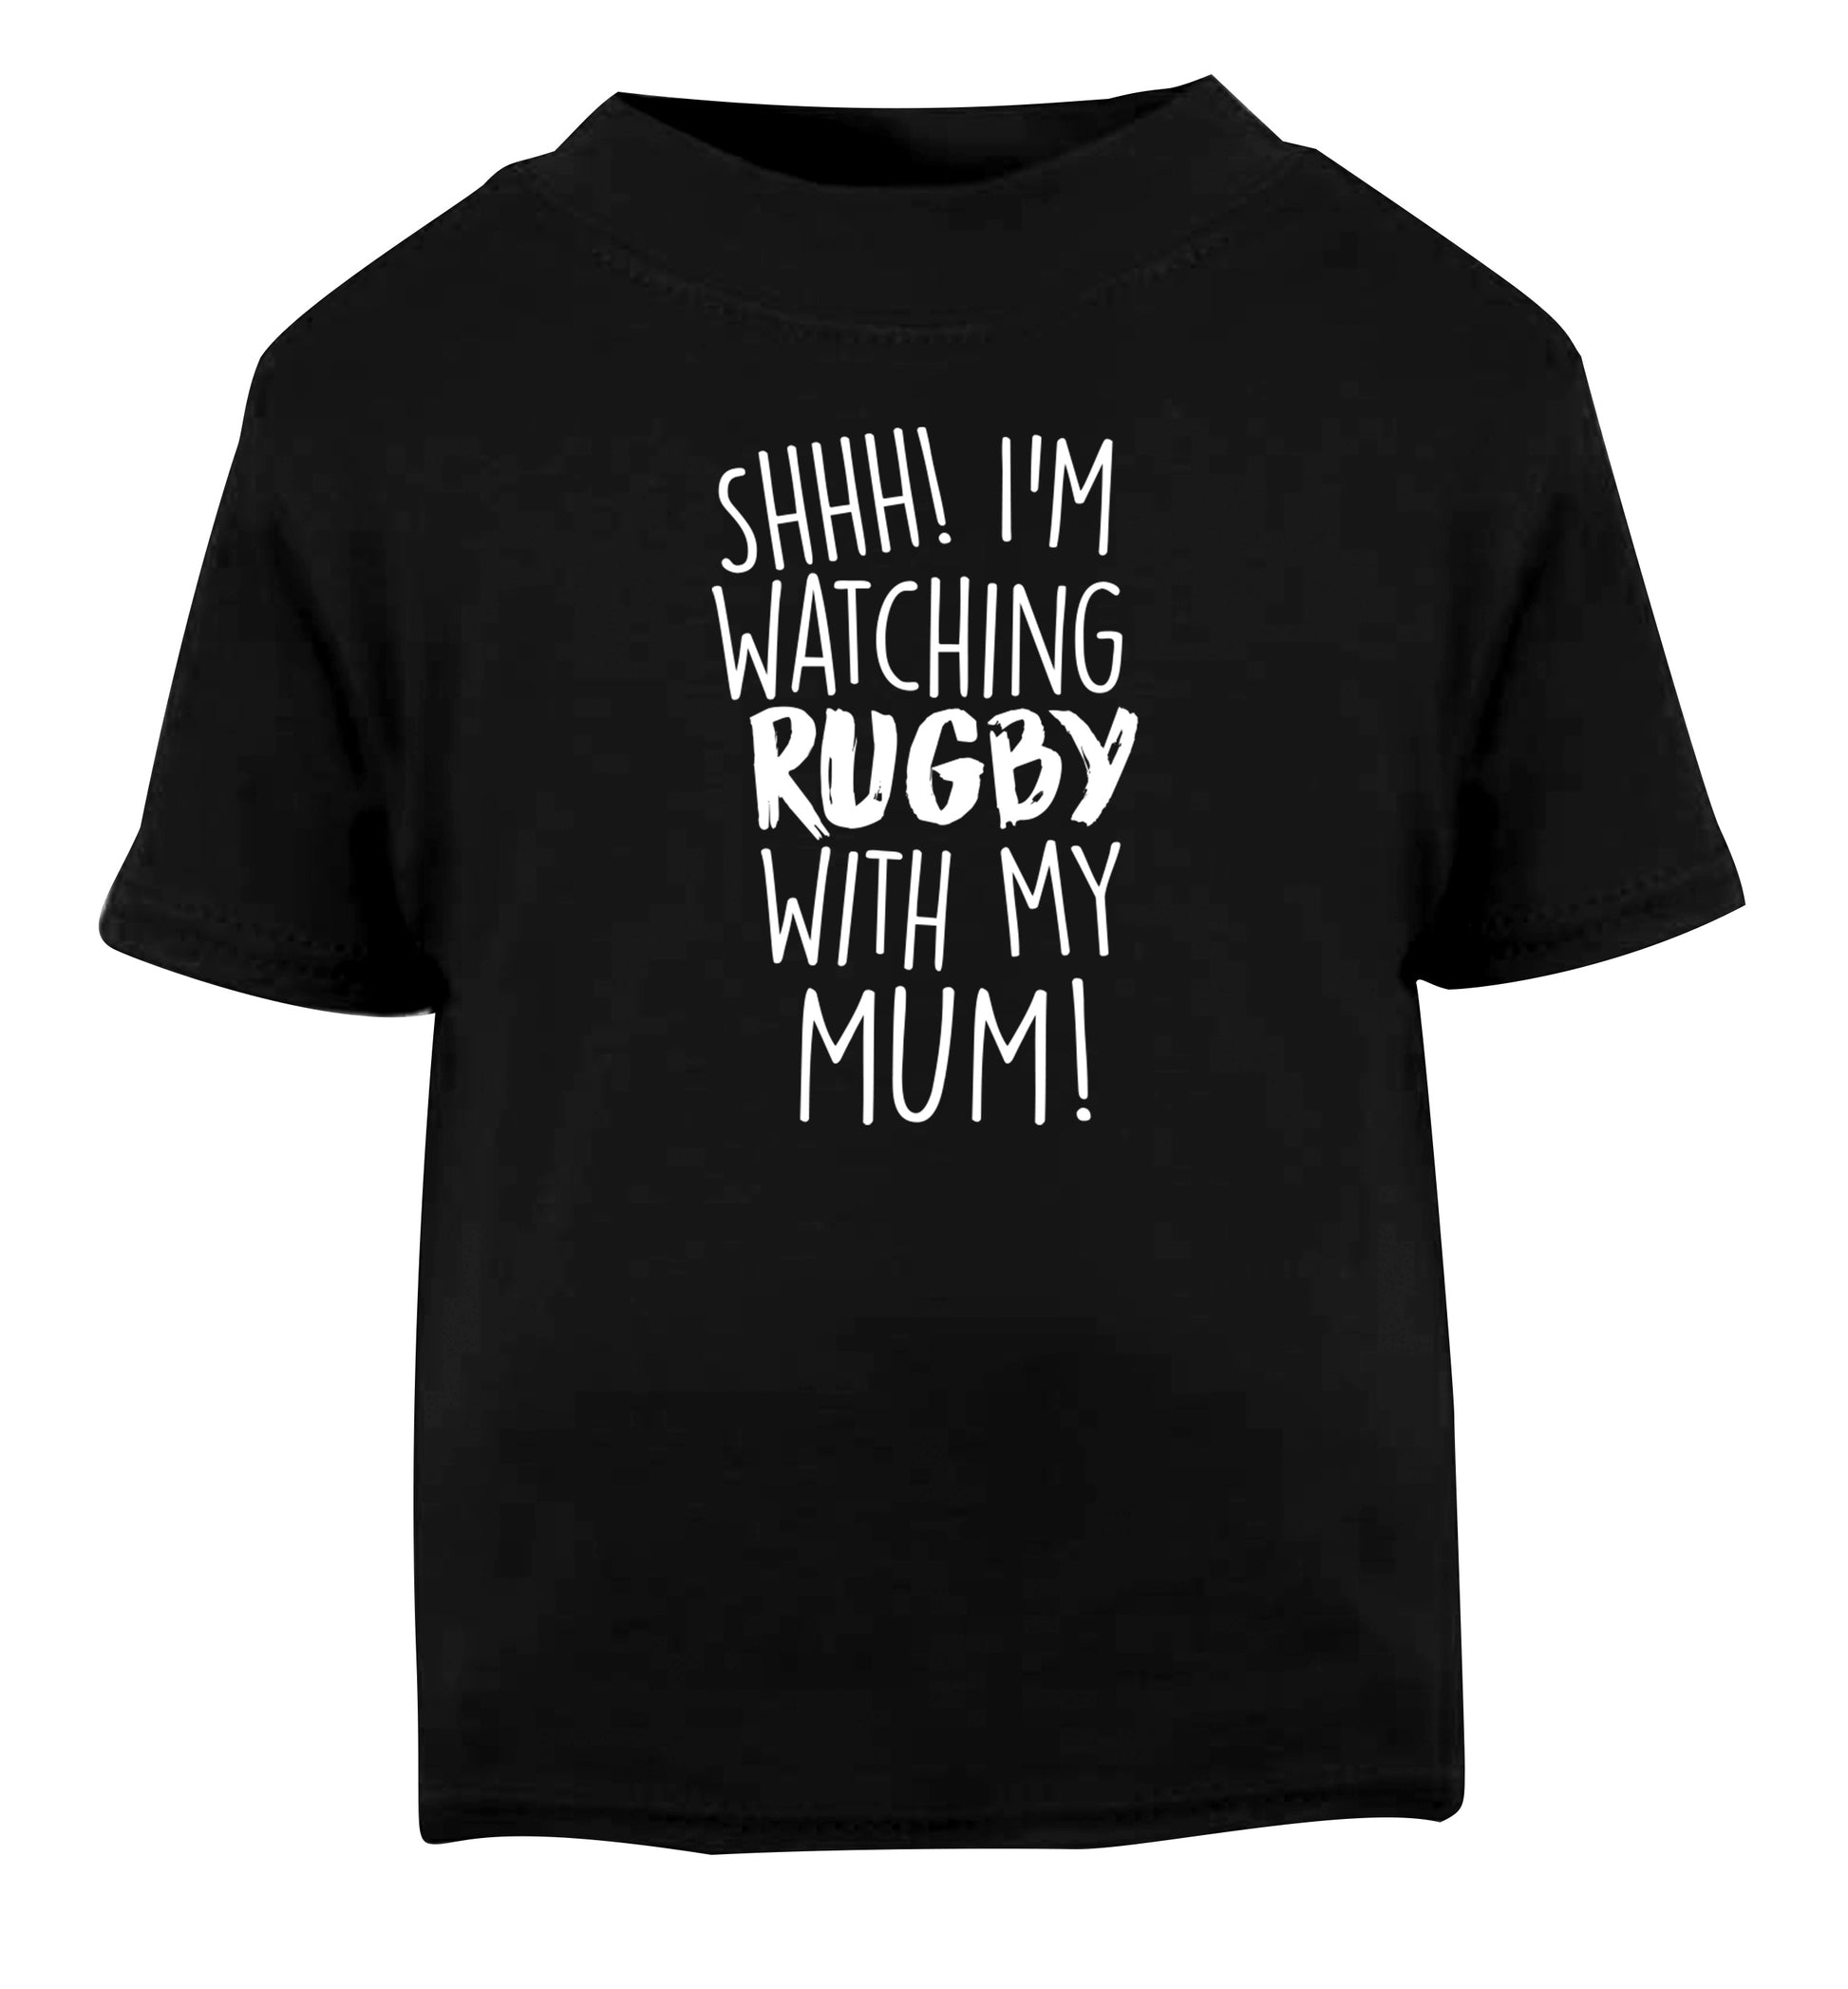 Shh... I'm watching rugby with my mum Black Baby Toddler Tshirt 2 years